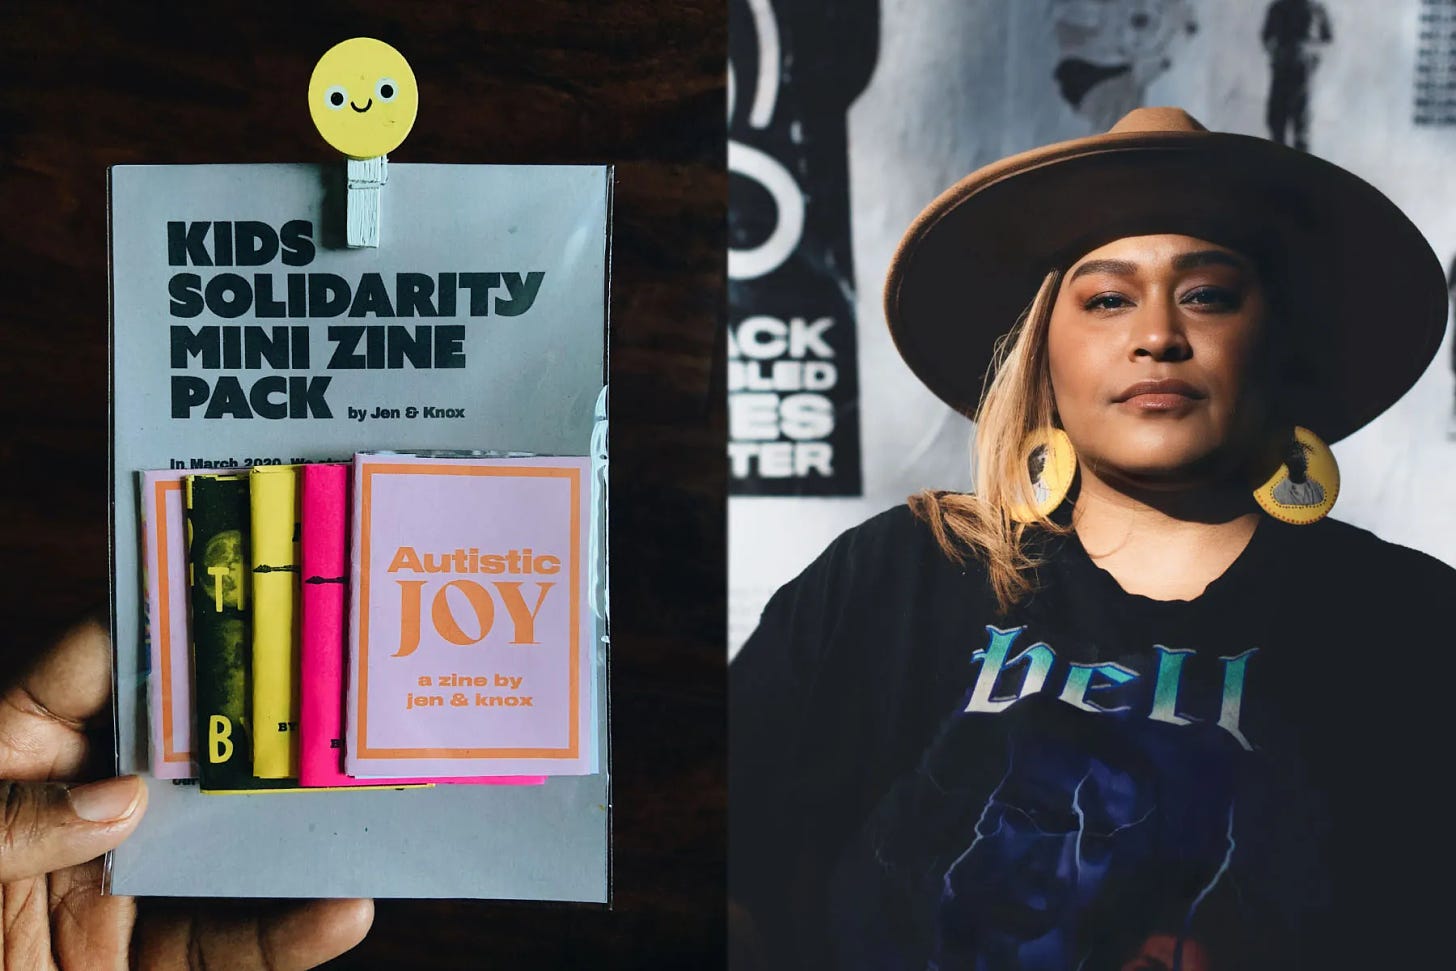 An disabled Afro-Latina designer looks directly at the camera, wearing a wide-brimmed hat and earrings an the illustrated bust. In another photo, a “Kids Solidarity Mini Zine Pack by Jen & Knox” is plastic-wrapped with 5 small zines.